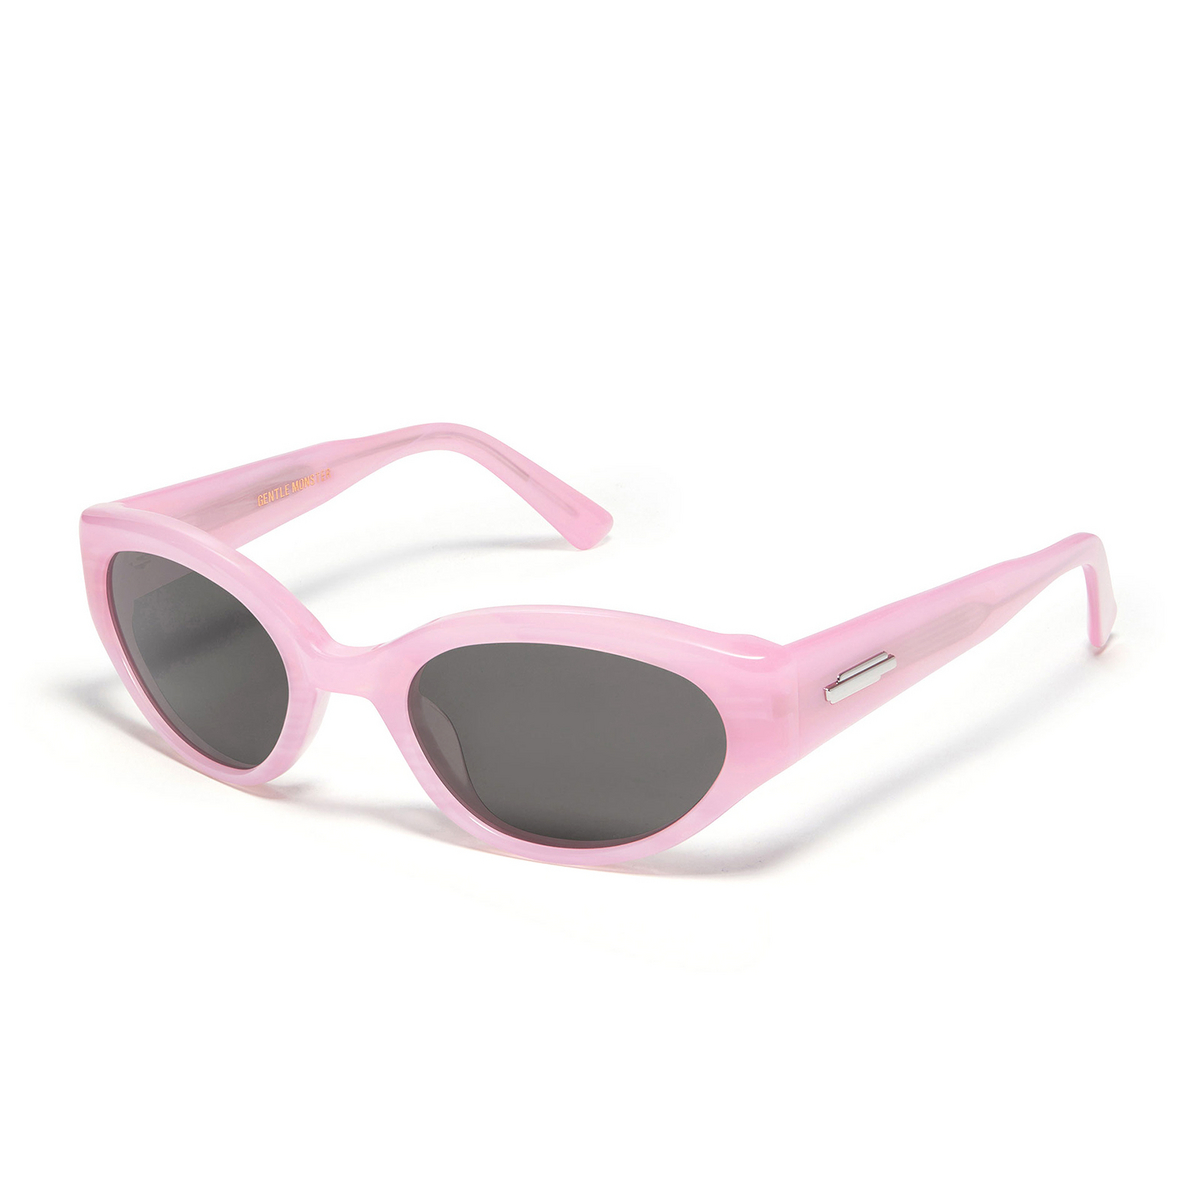 Gentle Monster MOLTO Sunglasses P1 Pink - three-quarters view